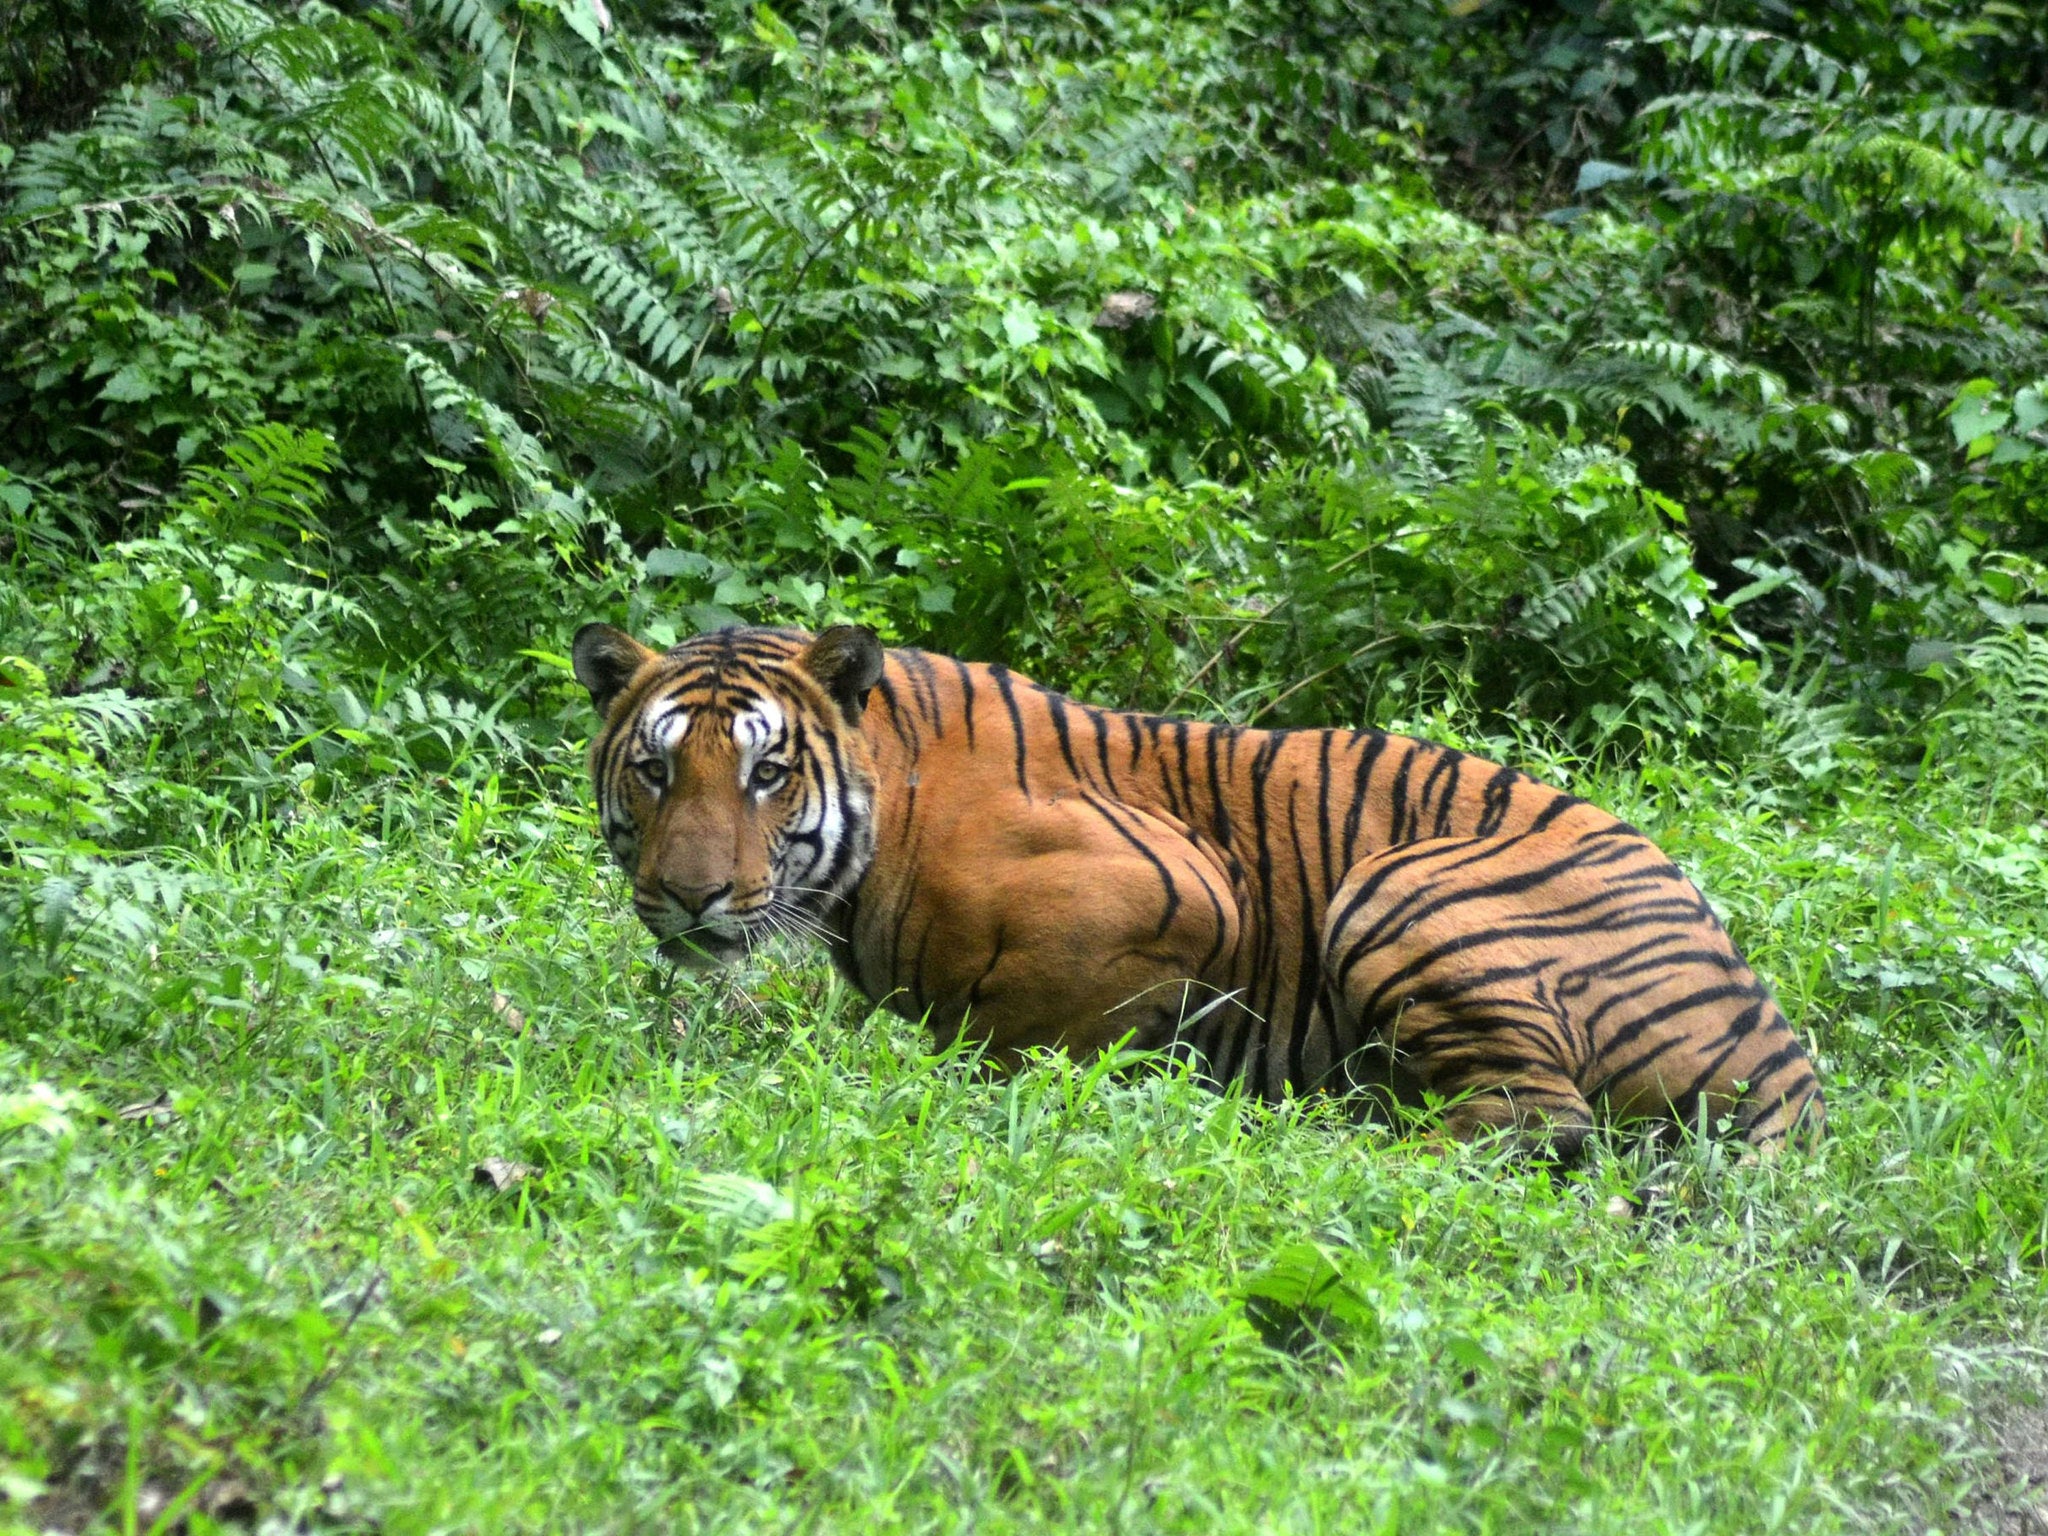 Last month the government’s wildlife conservationist estimated that current tiger populations in the Sundarbans were between 80 and 130